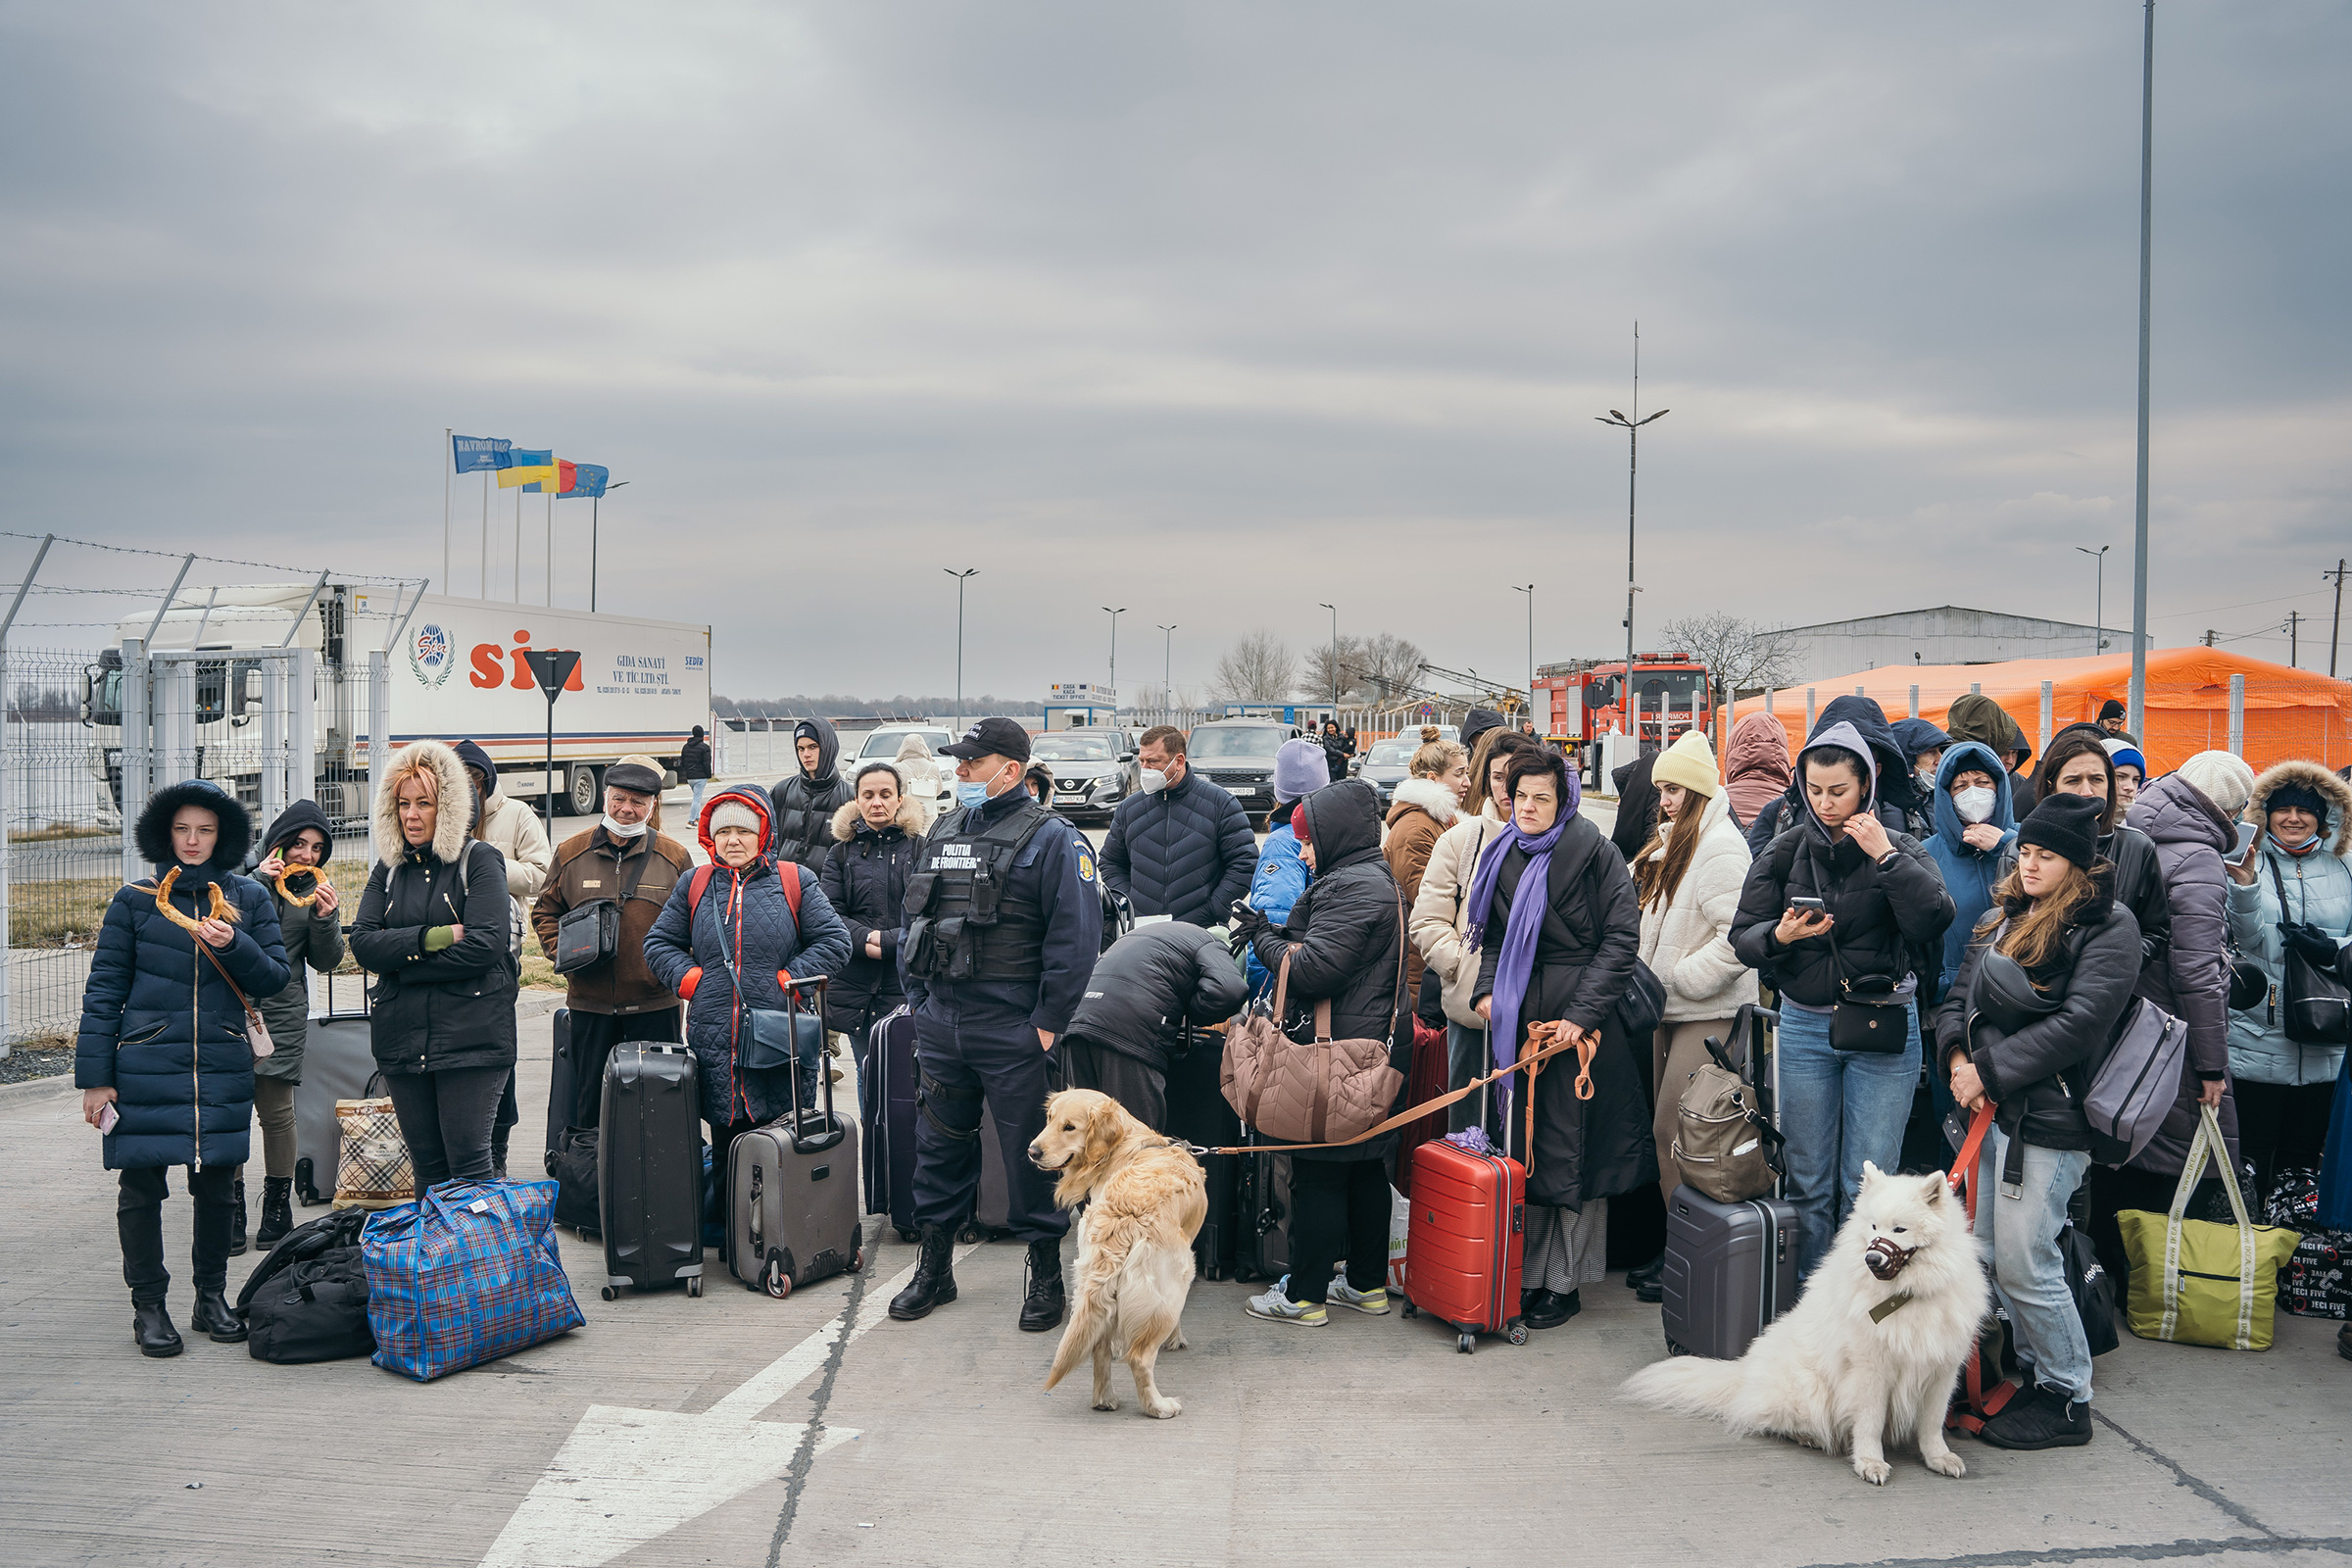 Displaced Ukrainians arrive at a border crossing in Isaccea, Romania, on Feb. 26. In Romania, authorities have dispatched border police, where locals are offering shelter, food, and medicine.